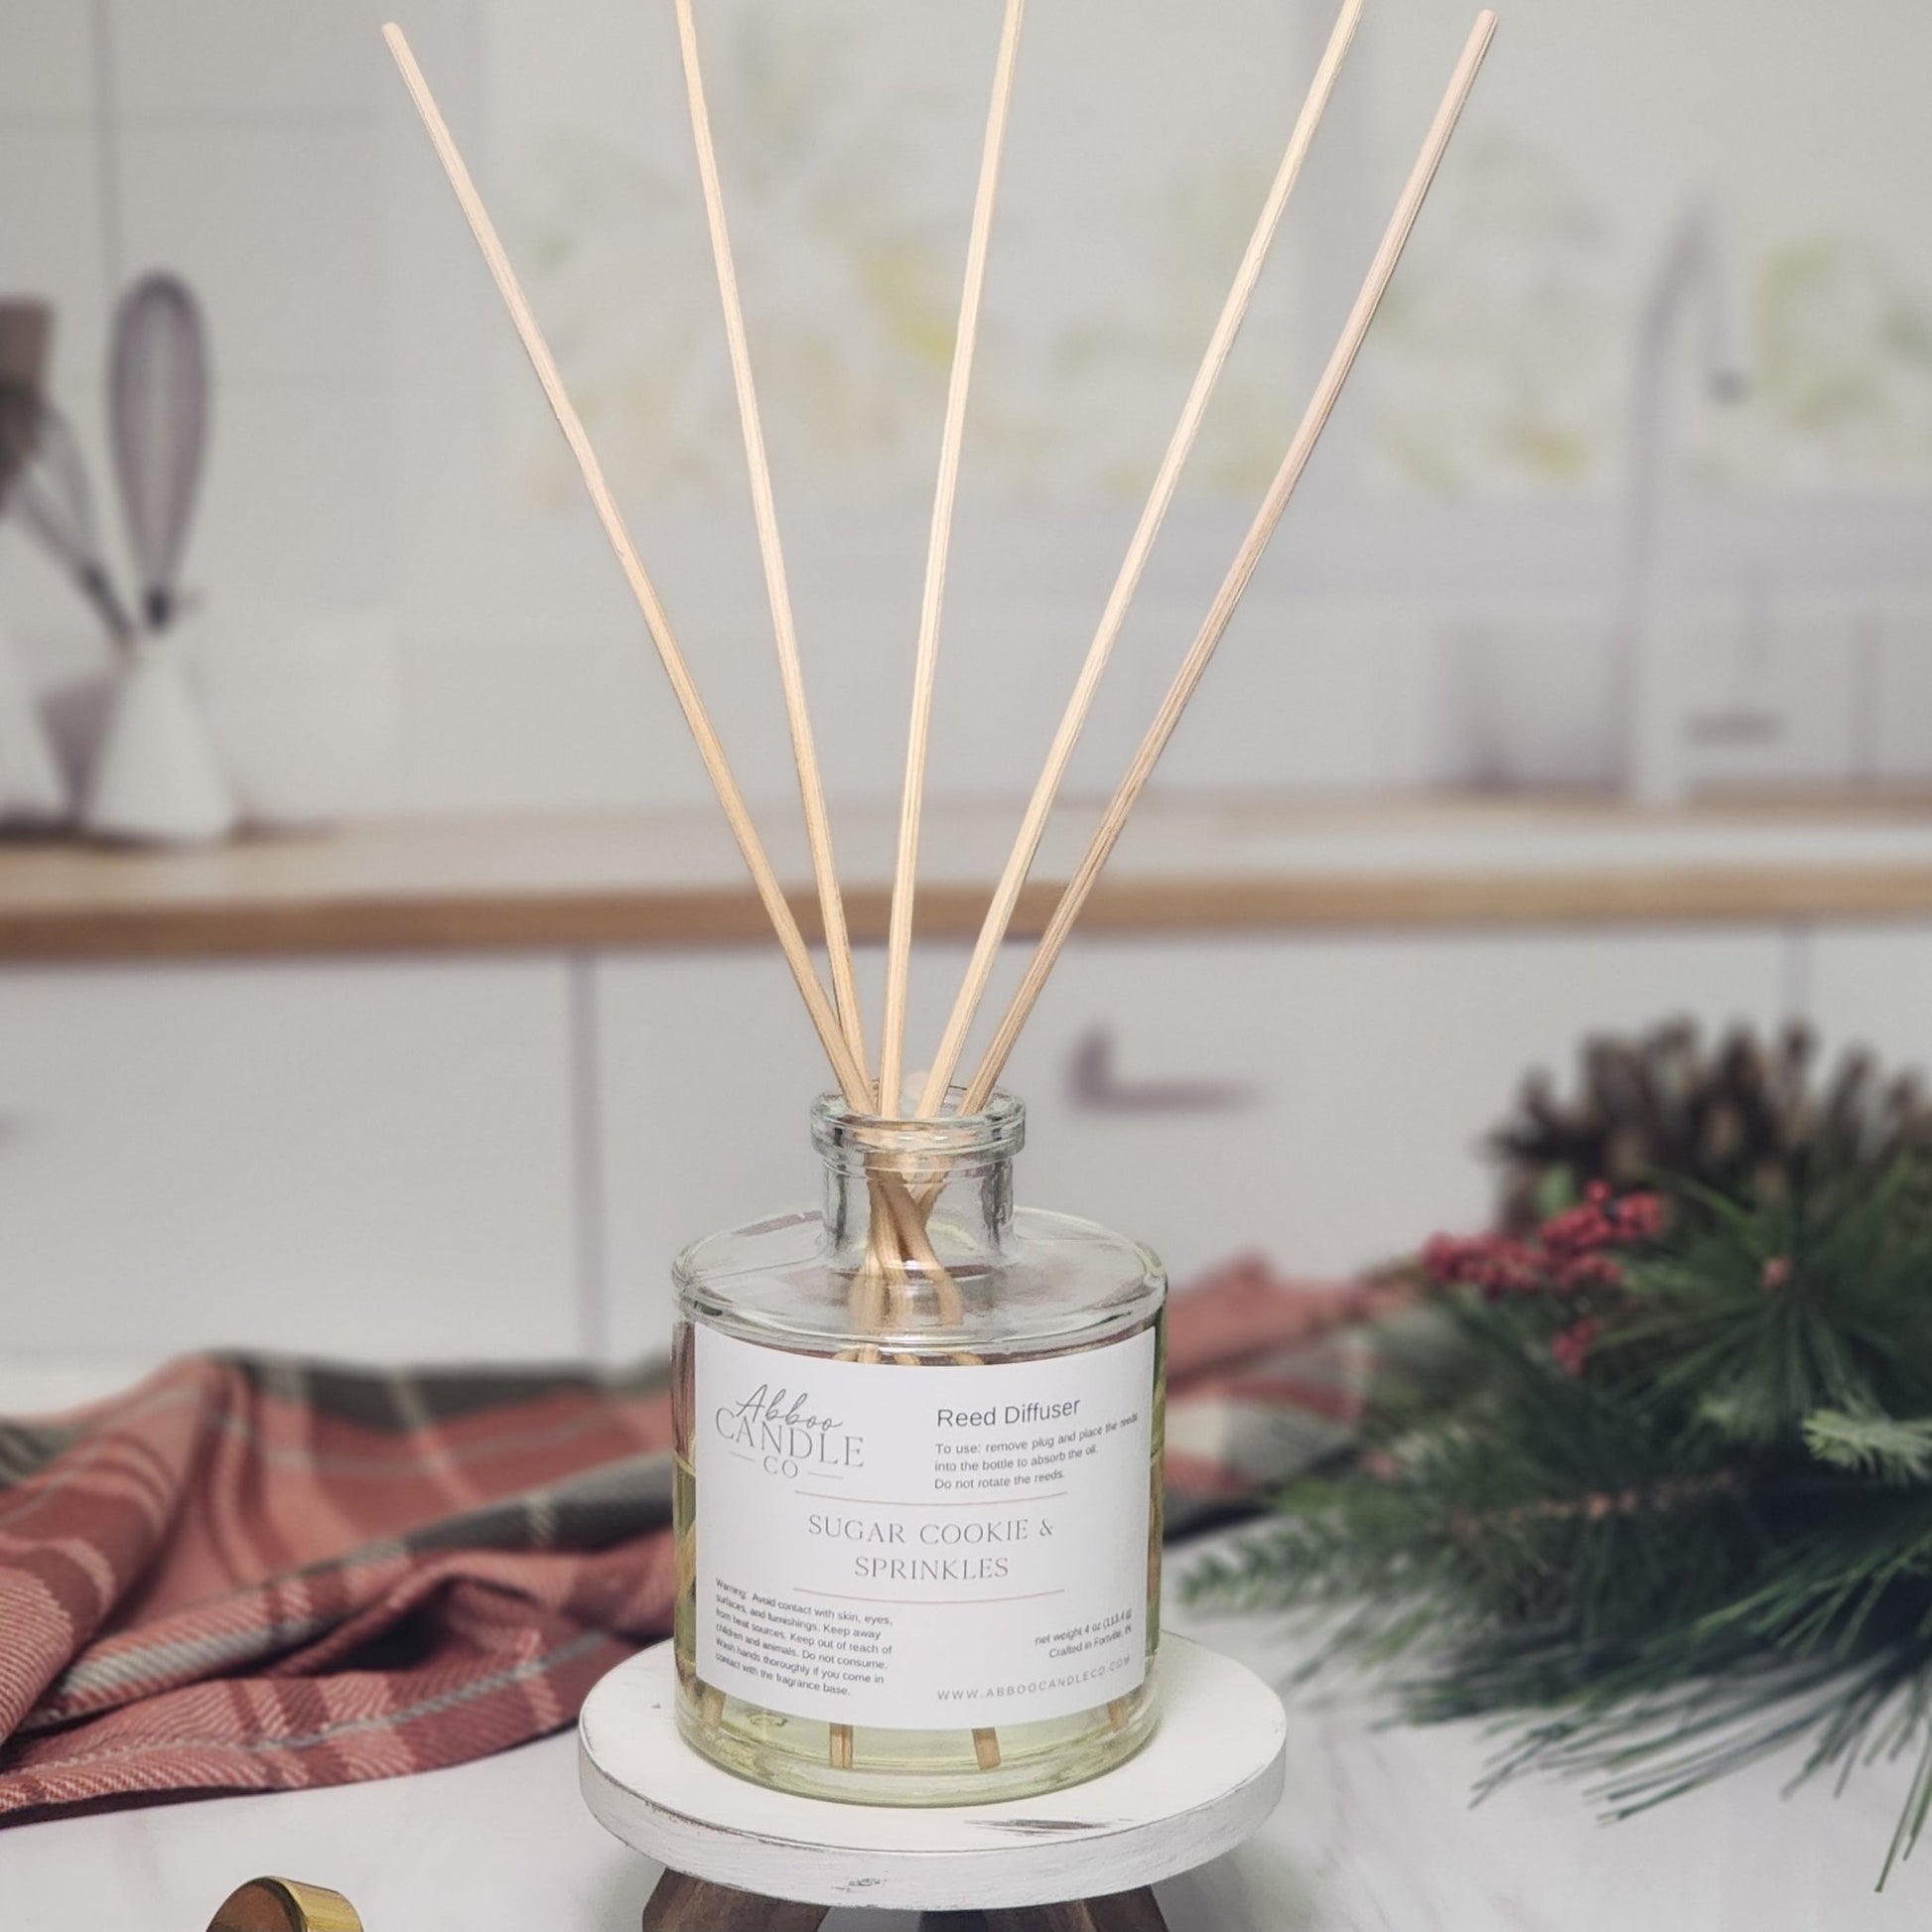 Reed Diffuser - Sugar Cookie and Sprinkles - Abboo Candle Co